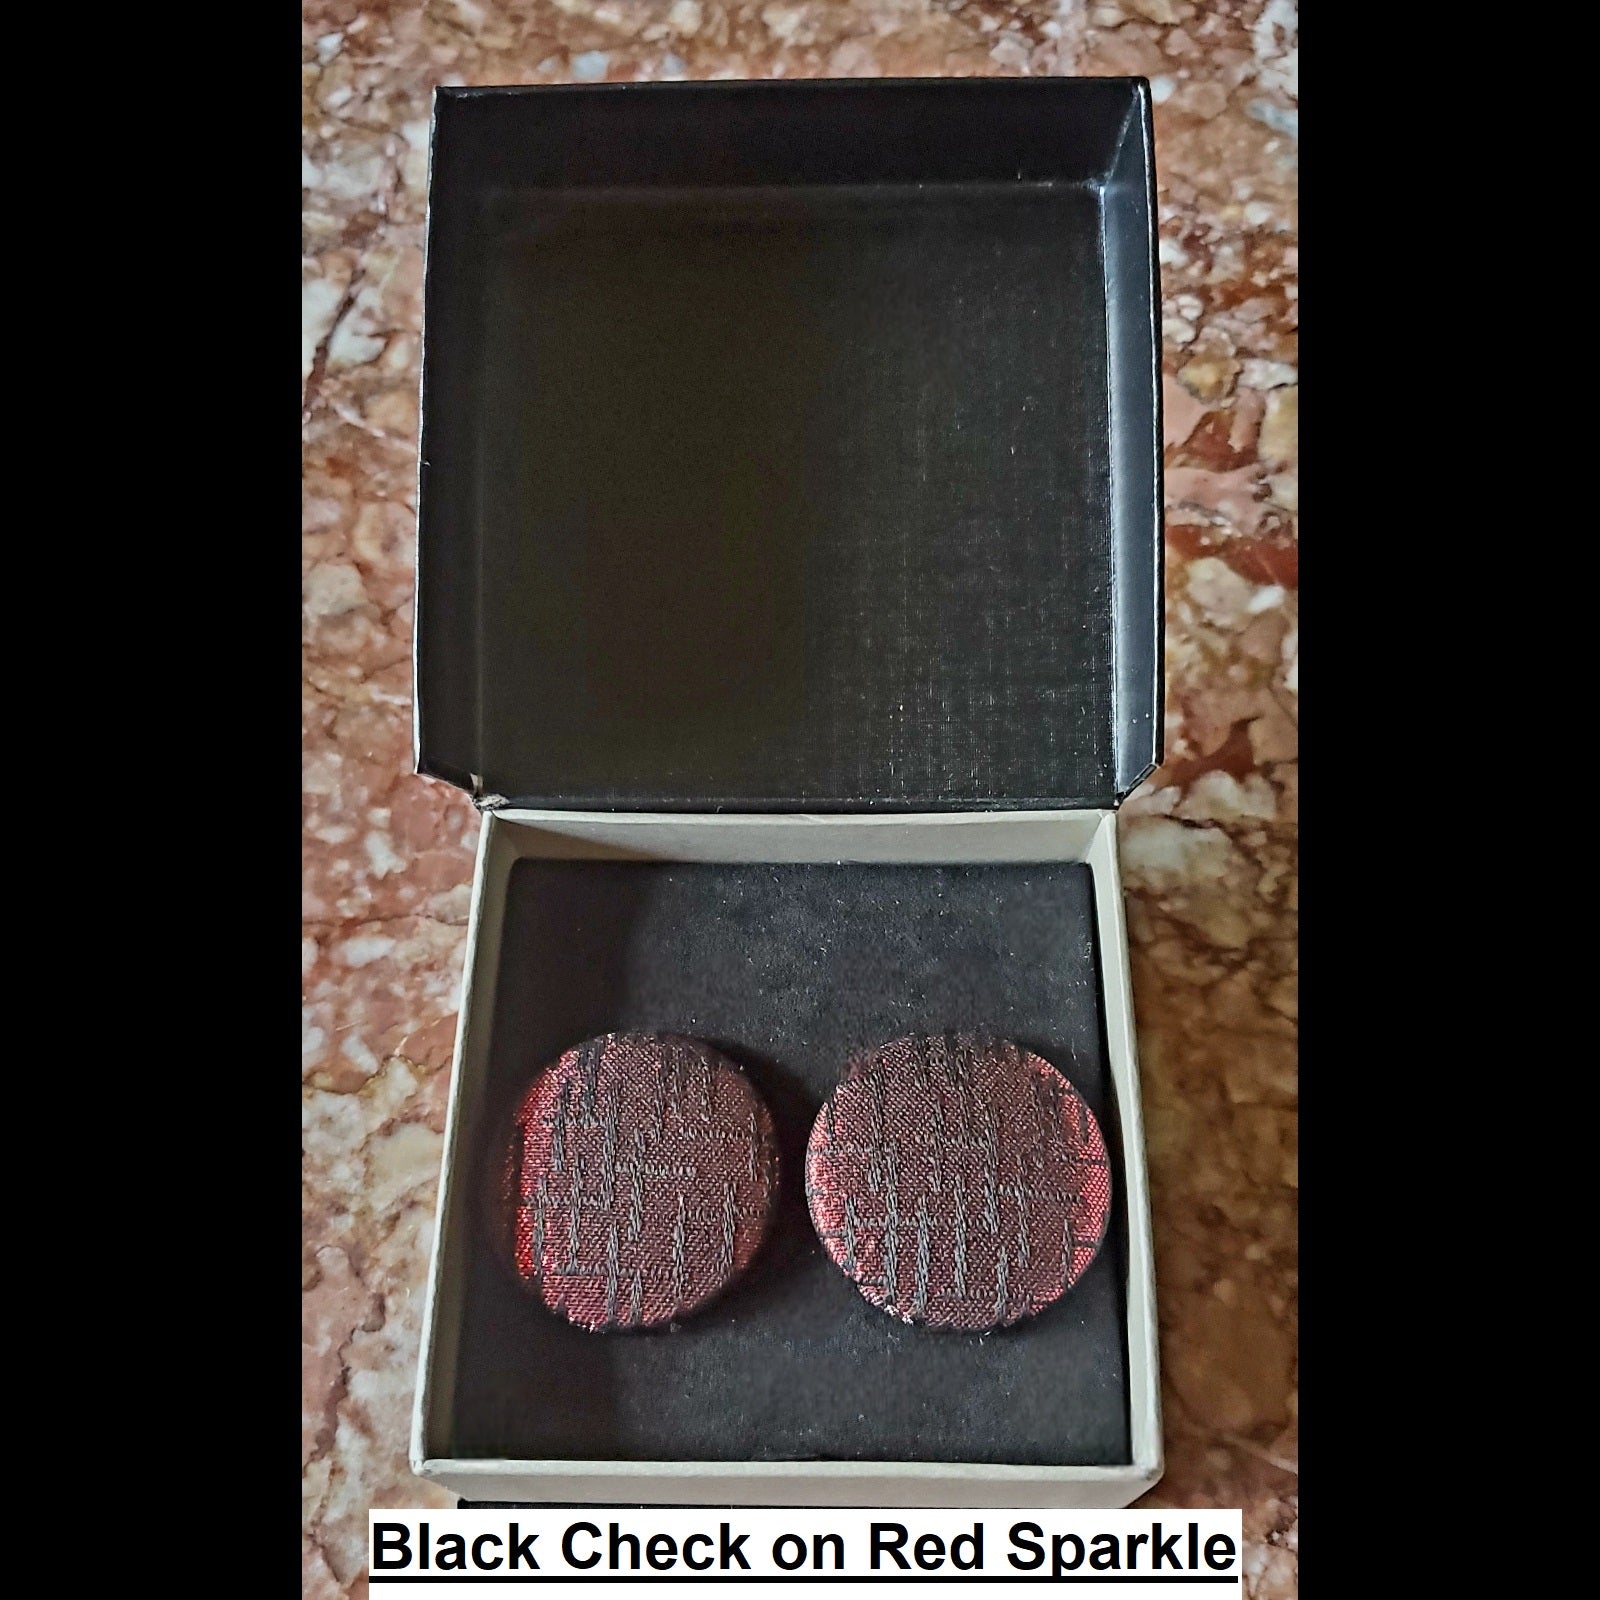 black check on red sparkle print button earrings in jewelry box